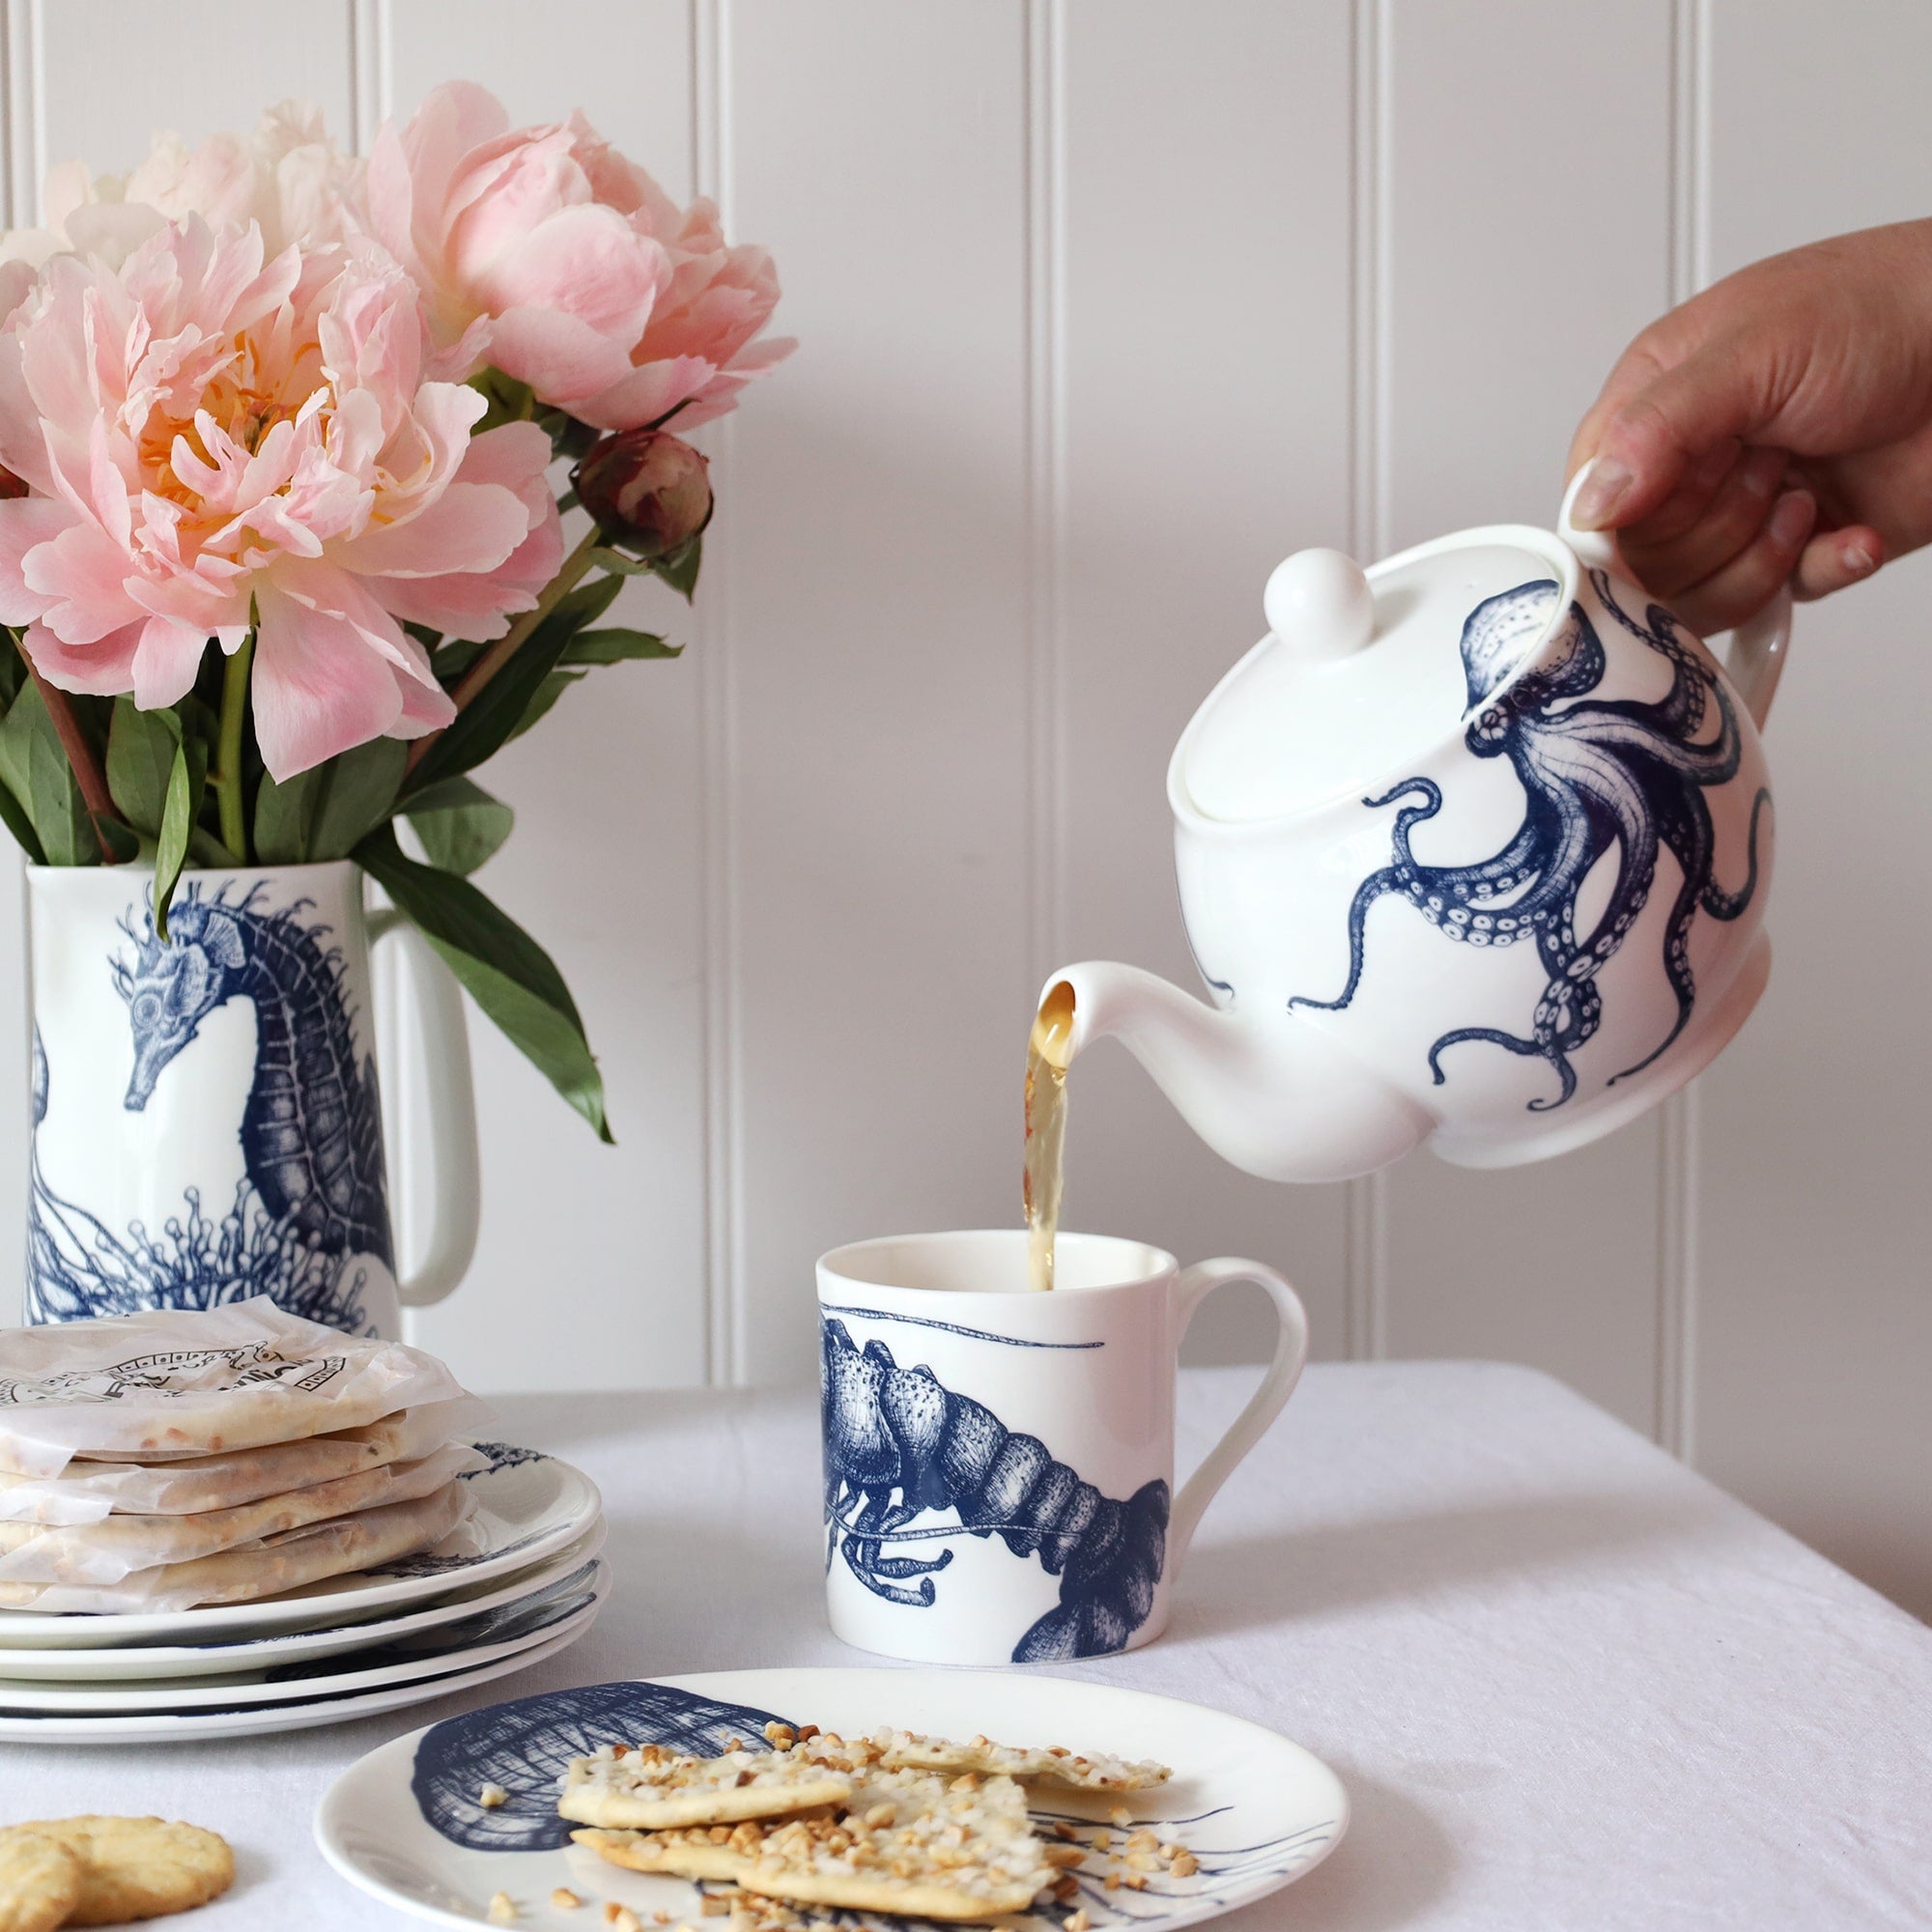 An informal table setting with blue & white coastal bone china on white linen and a shiplap background. There is an teapot with an octopus design pouring tea into a white mug that is decorated with a dark blue illustrated lobster tail.r 